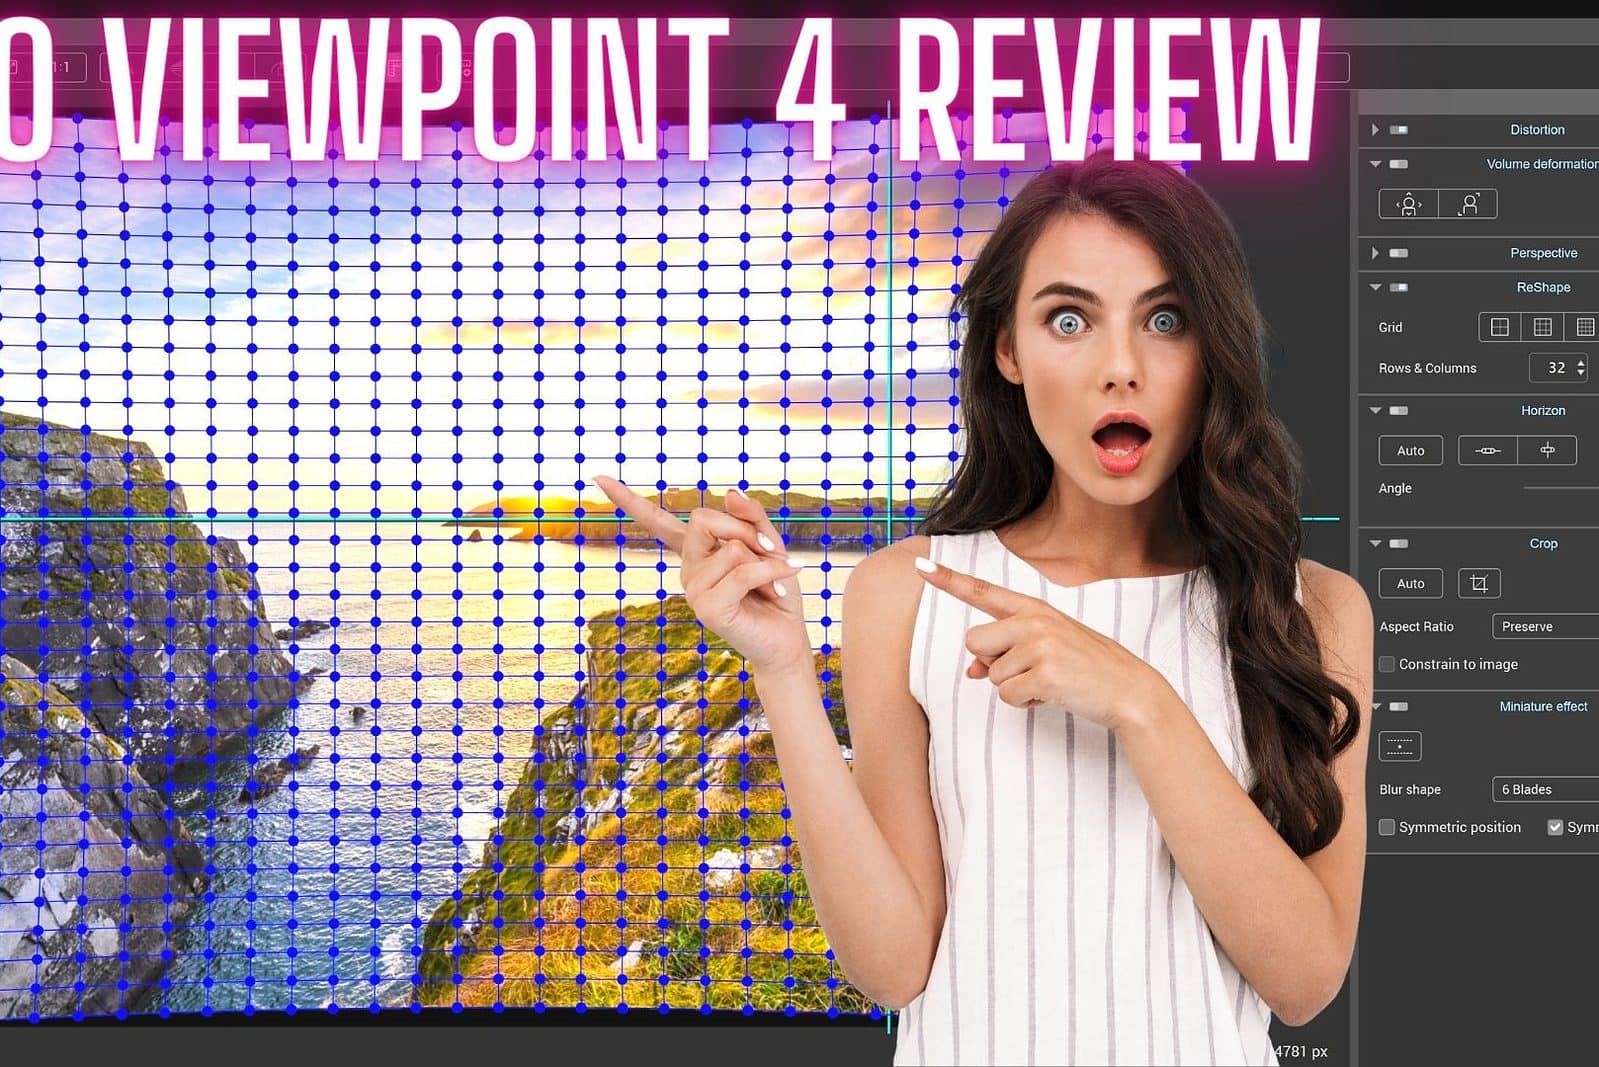 DxO Viewpoint 4 review, what exactly is it and do you even need it?